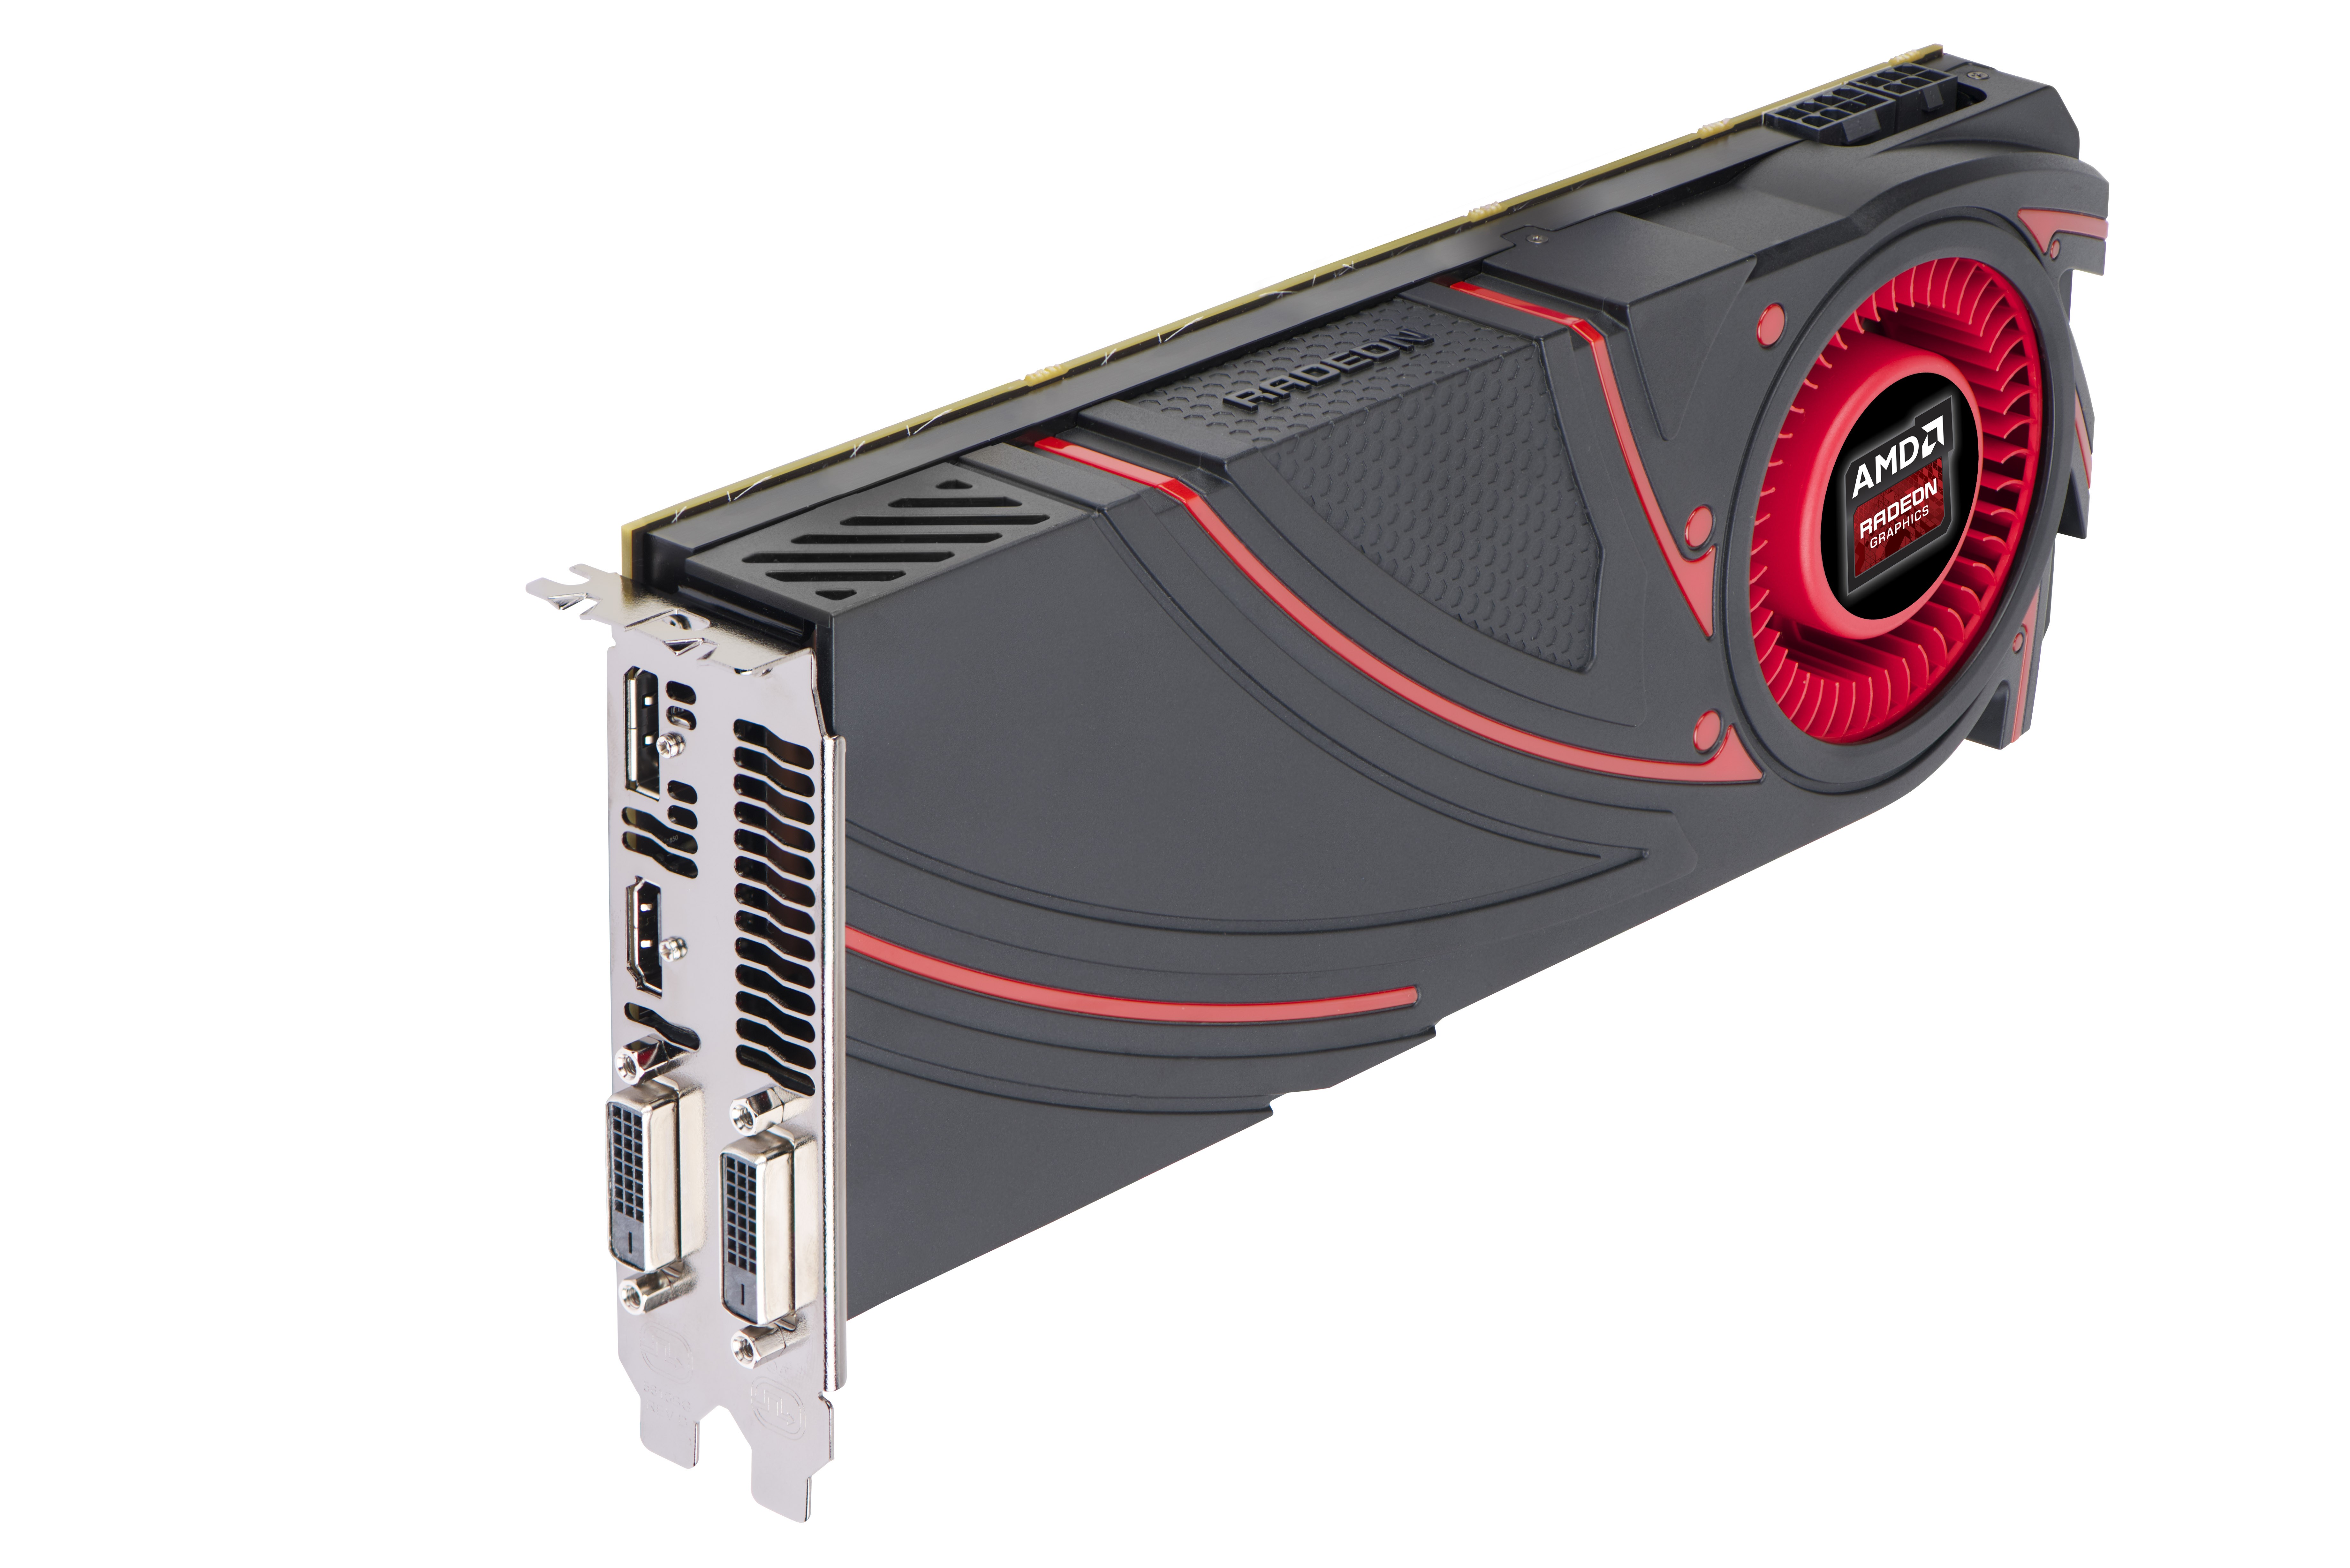 The Amd Radeon R9 290 Review